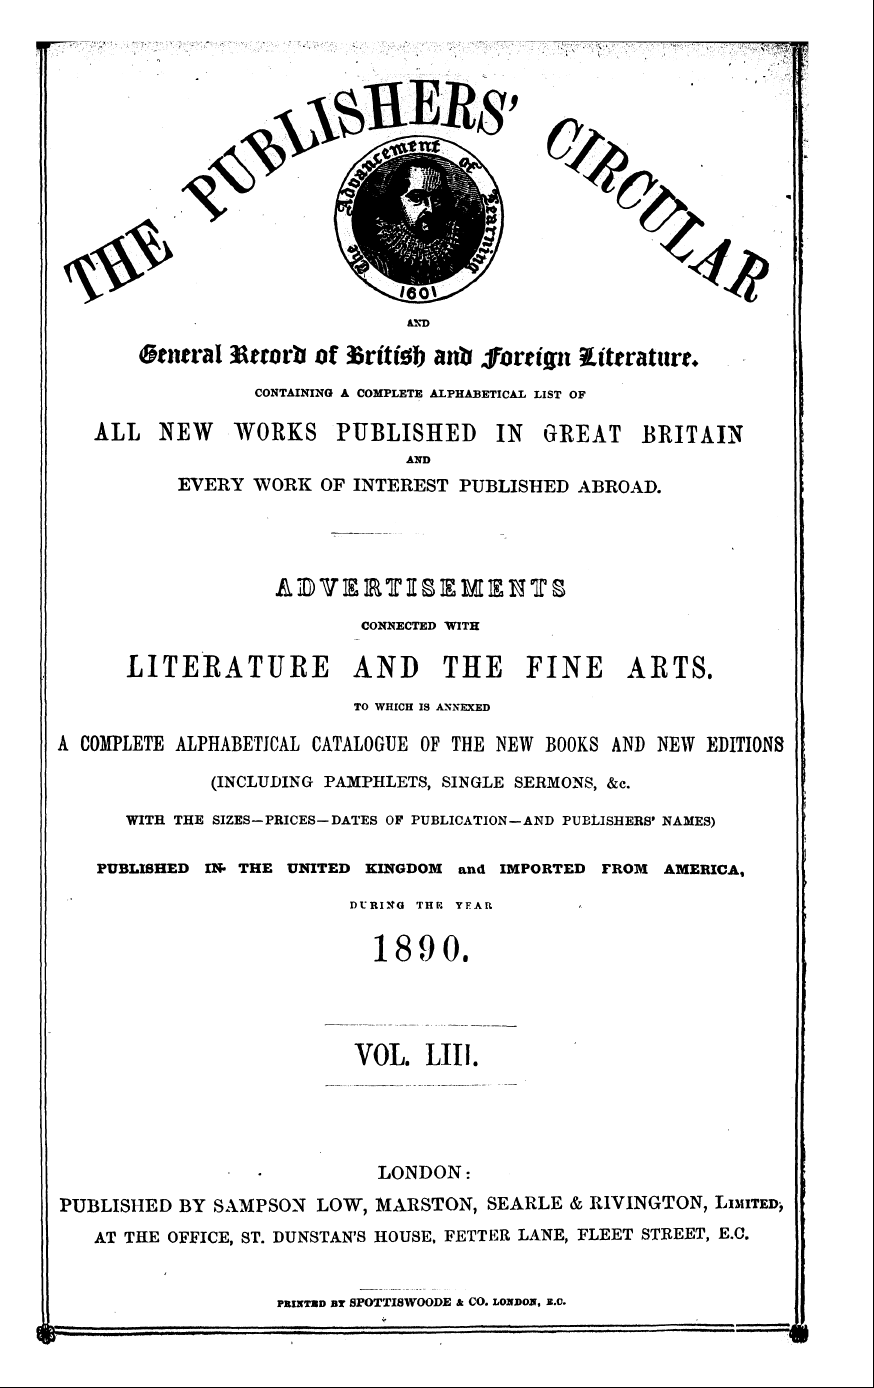 Publishers’ Circular (1880-1890): jS F Y, 1st edition, Front matter: 1